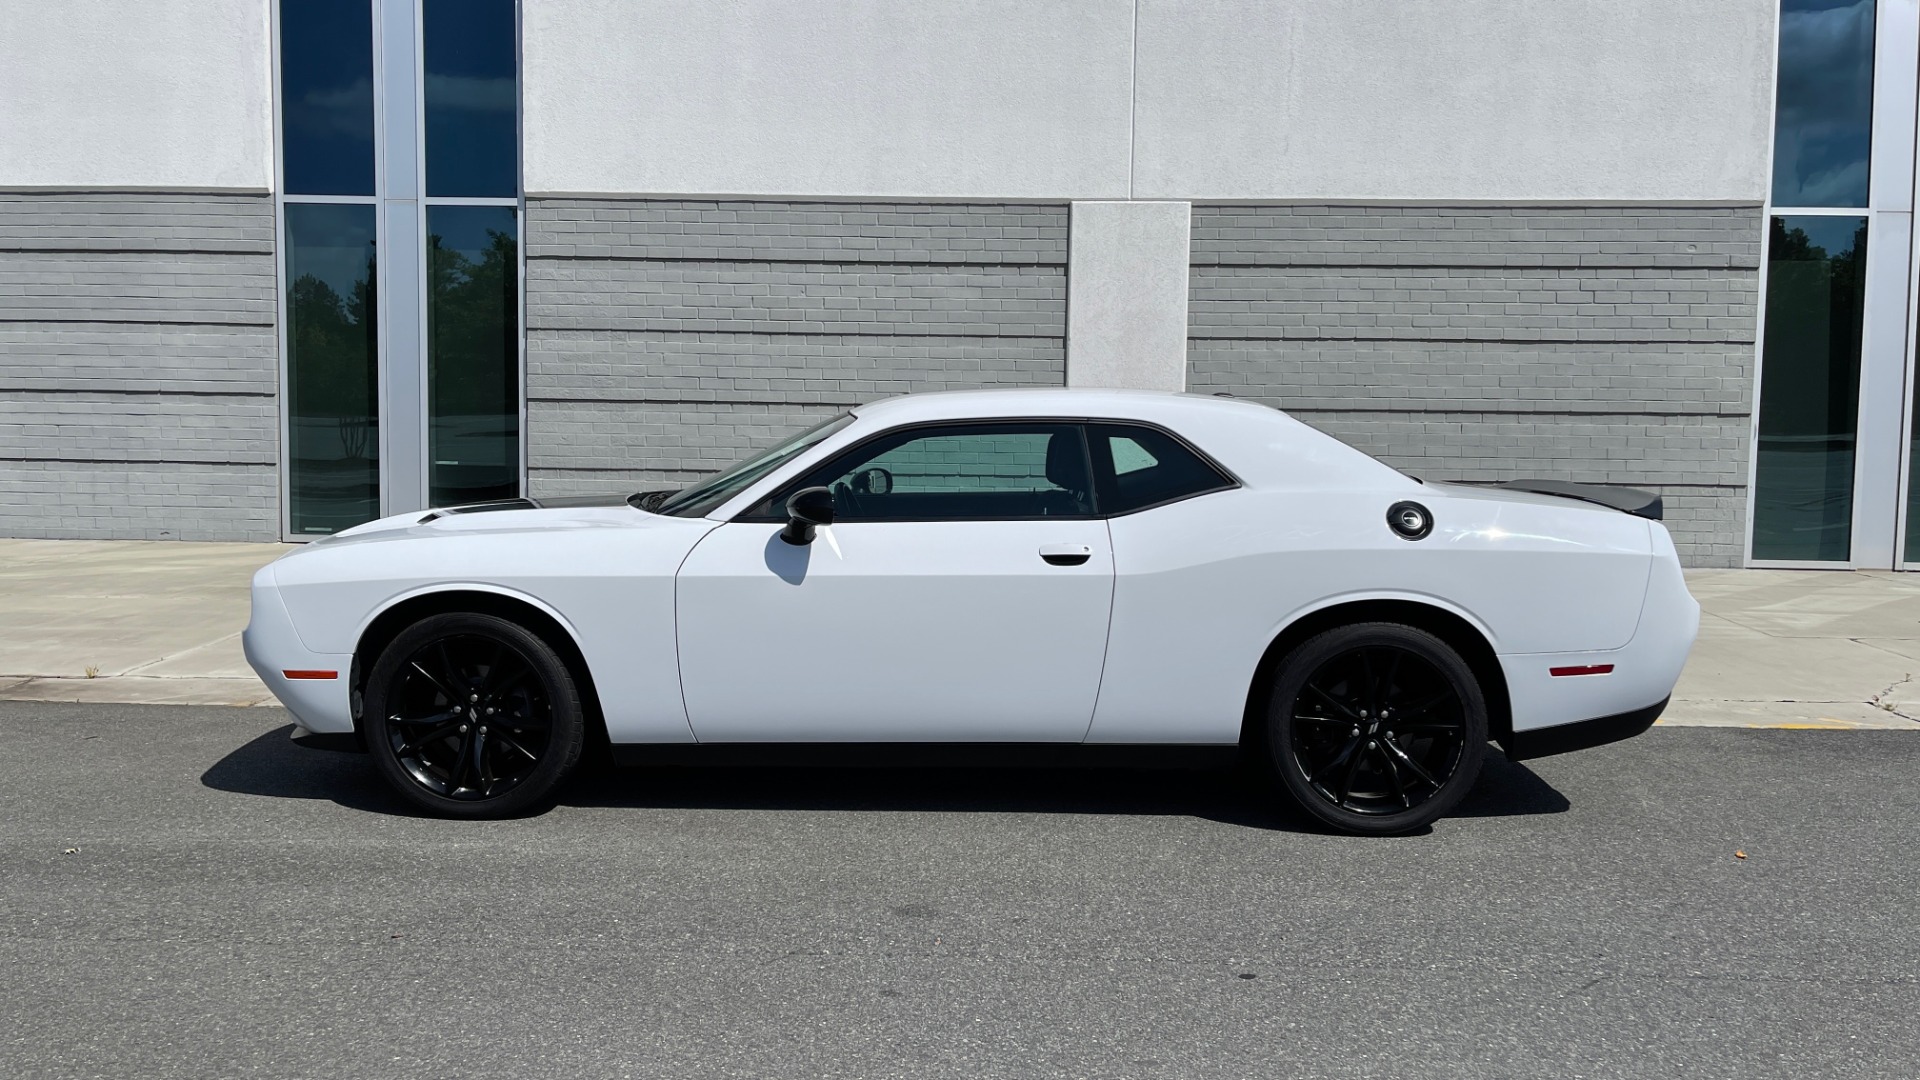 Used 2018 Dodge CHALLENGER SXT BLACKTOP COUPE / 3.6L V6 / 8-SPD AUTO / REARVIEW for sale Sold at Formula Imports in Charlotte NC 28227 4